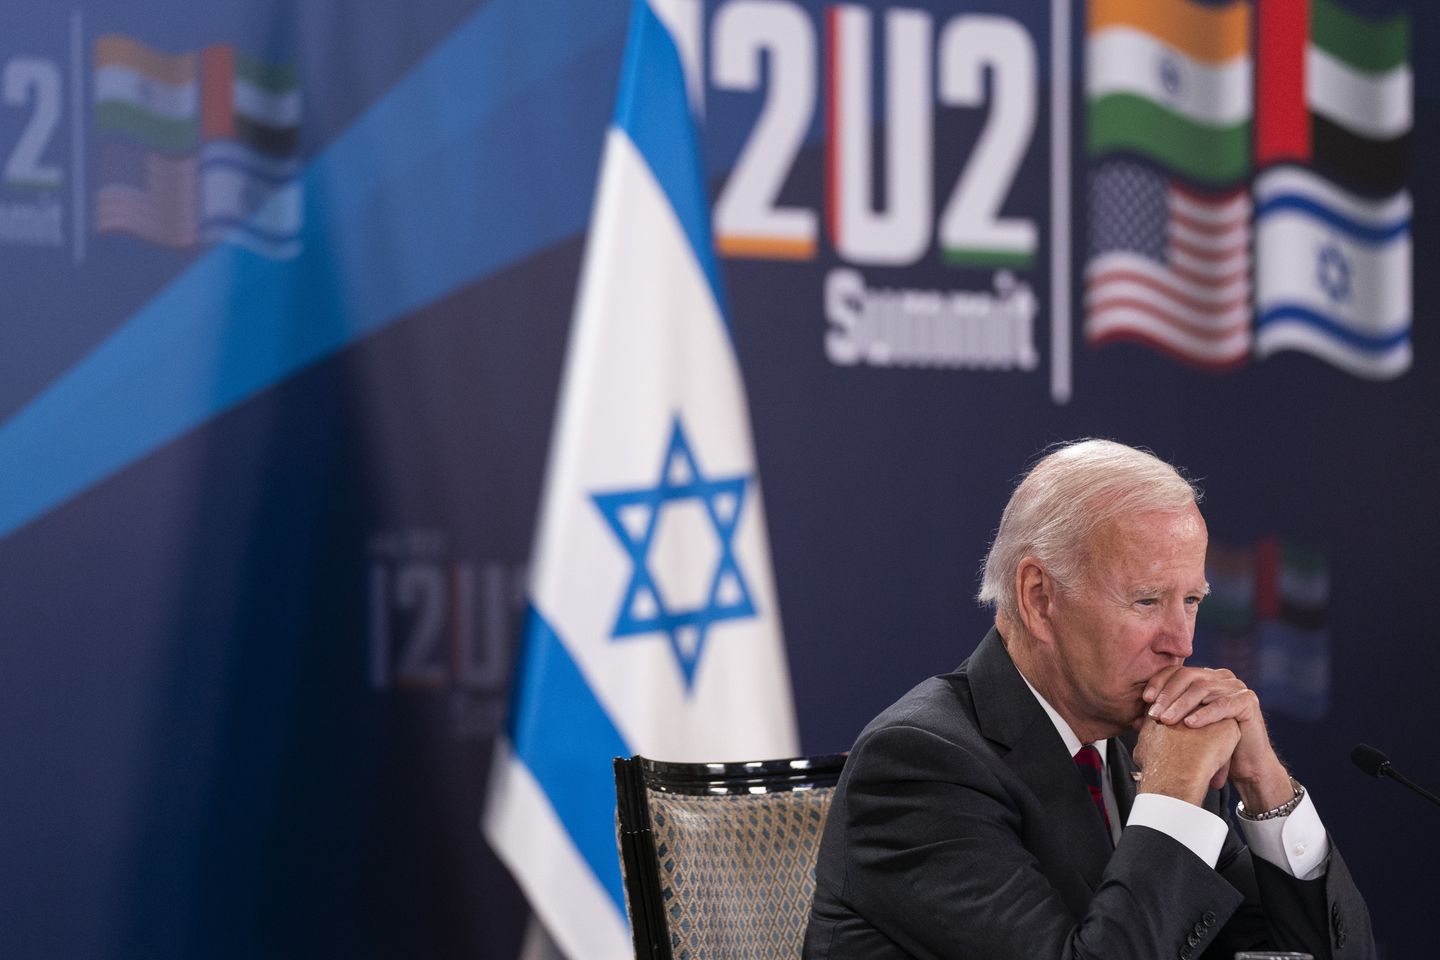 Biden says the U.S. won't 'wait forever' for an Iran nuclear deal